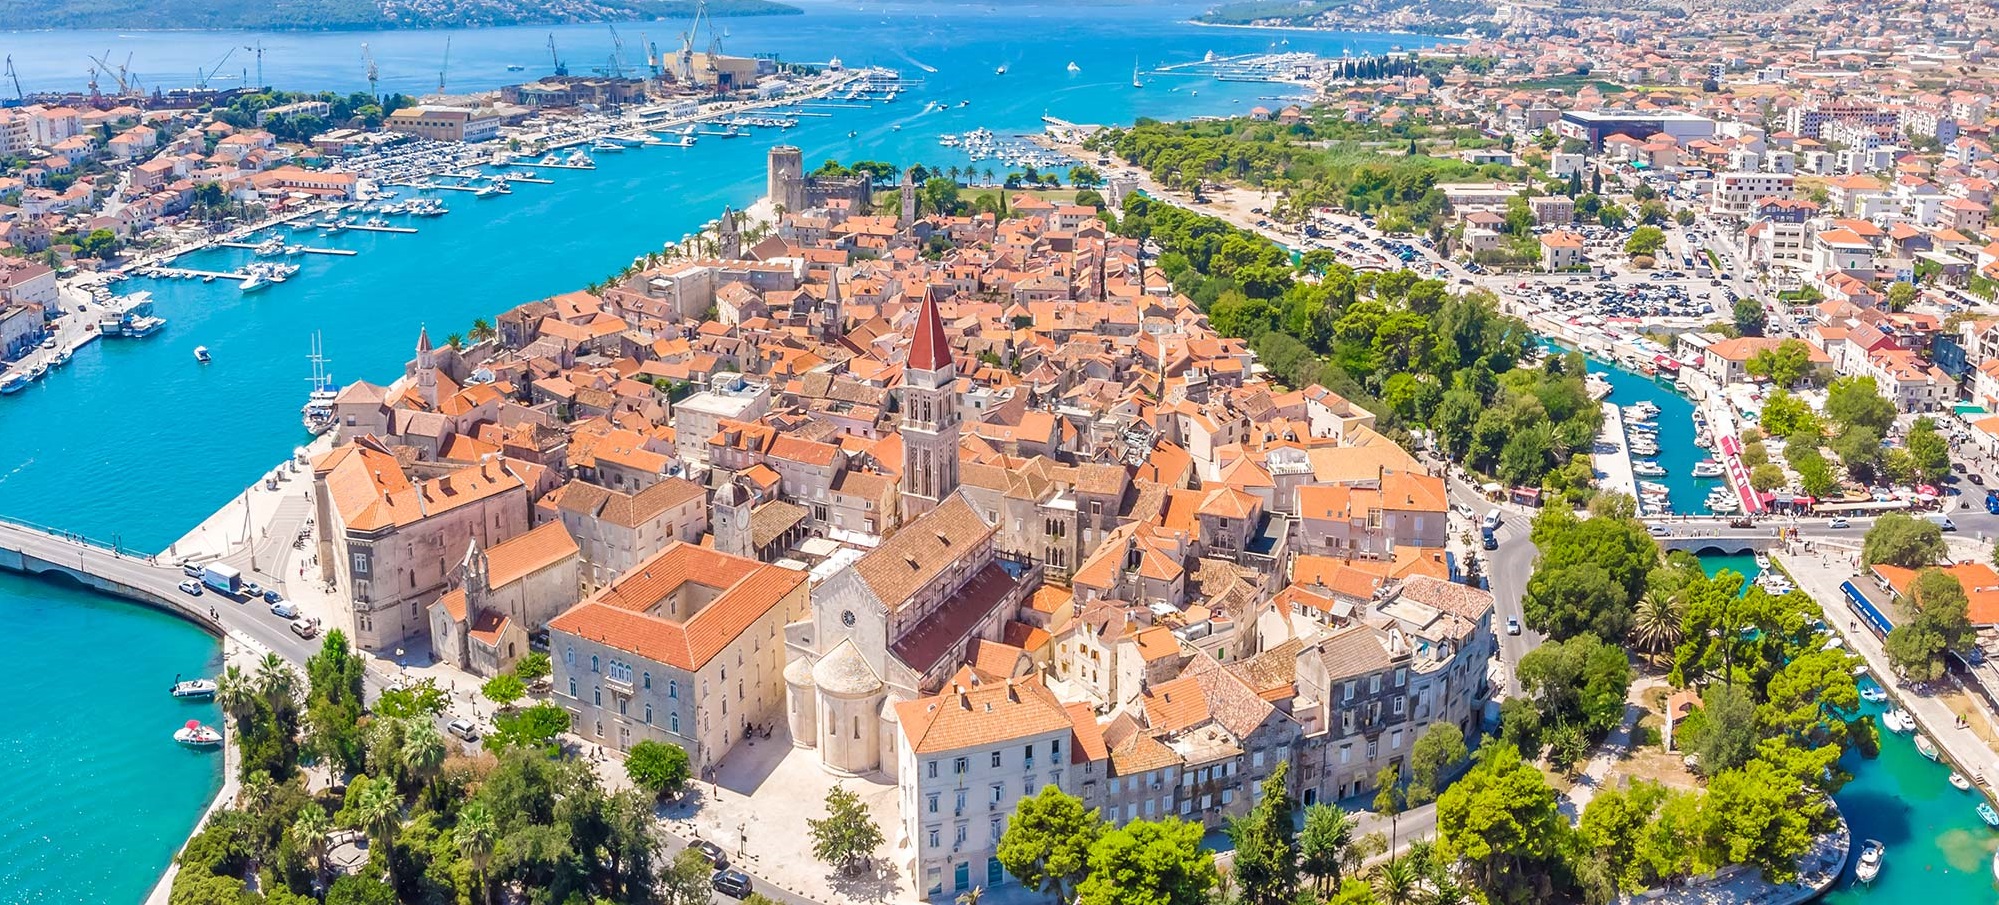 Trogir: Your Foolproof Guide this UNESCO Town